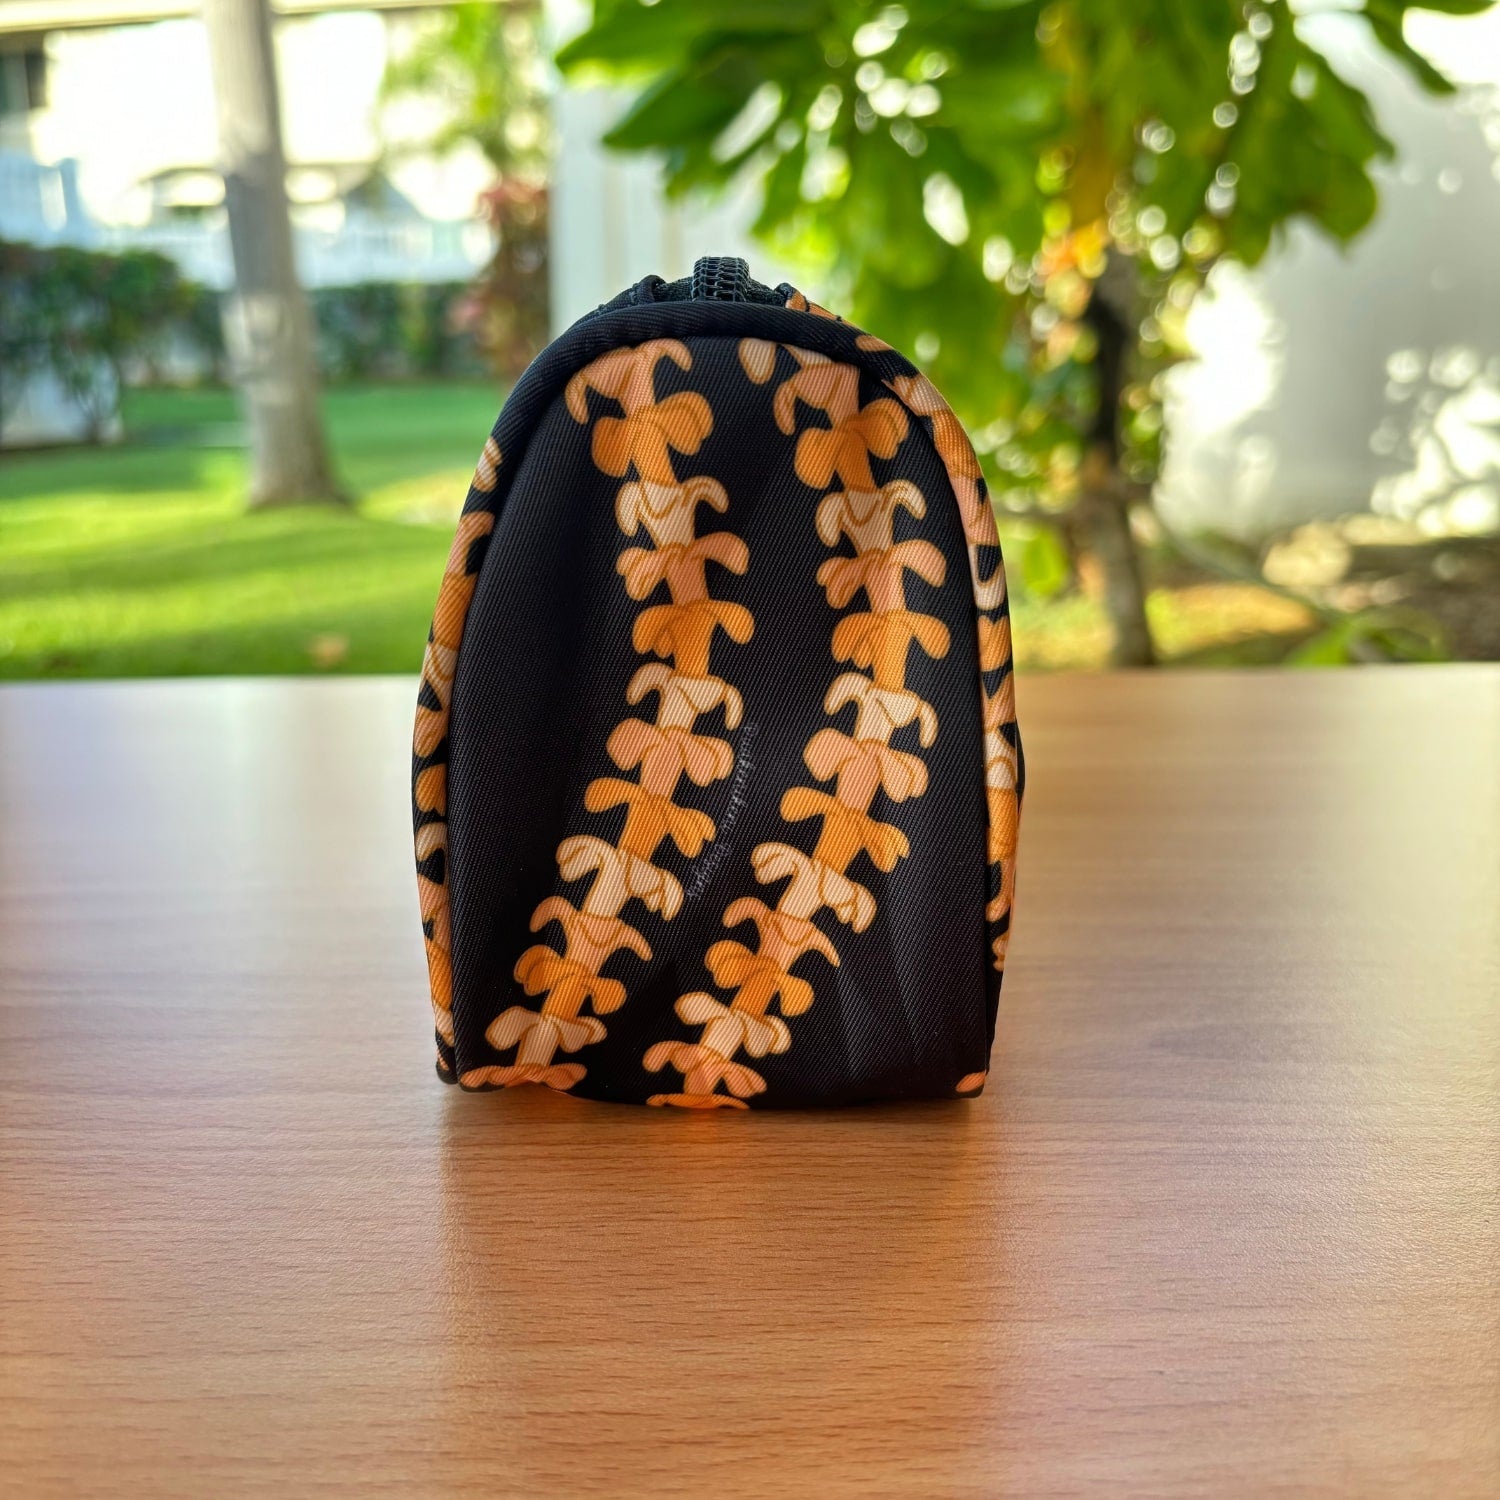 grab and go set includes mini zipper pouch and wristlet key fob in kaulua black orange lei - from Puakenikeni Designs - side view of mini zipper pouch